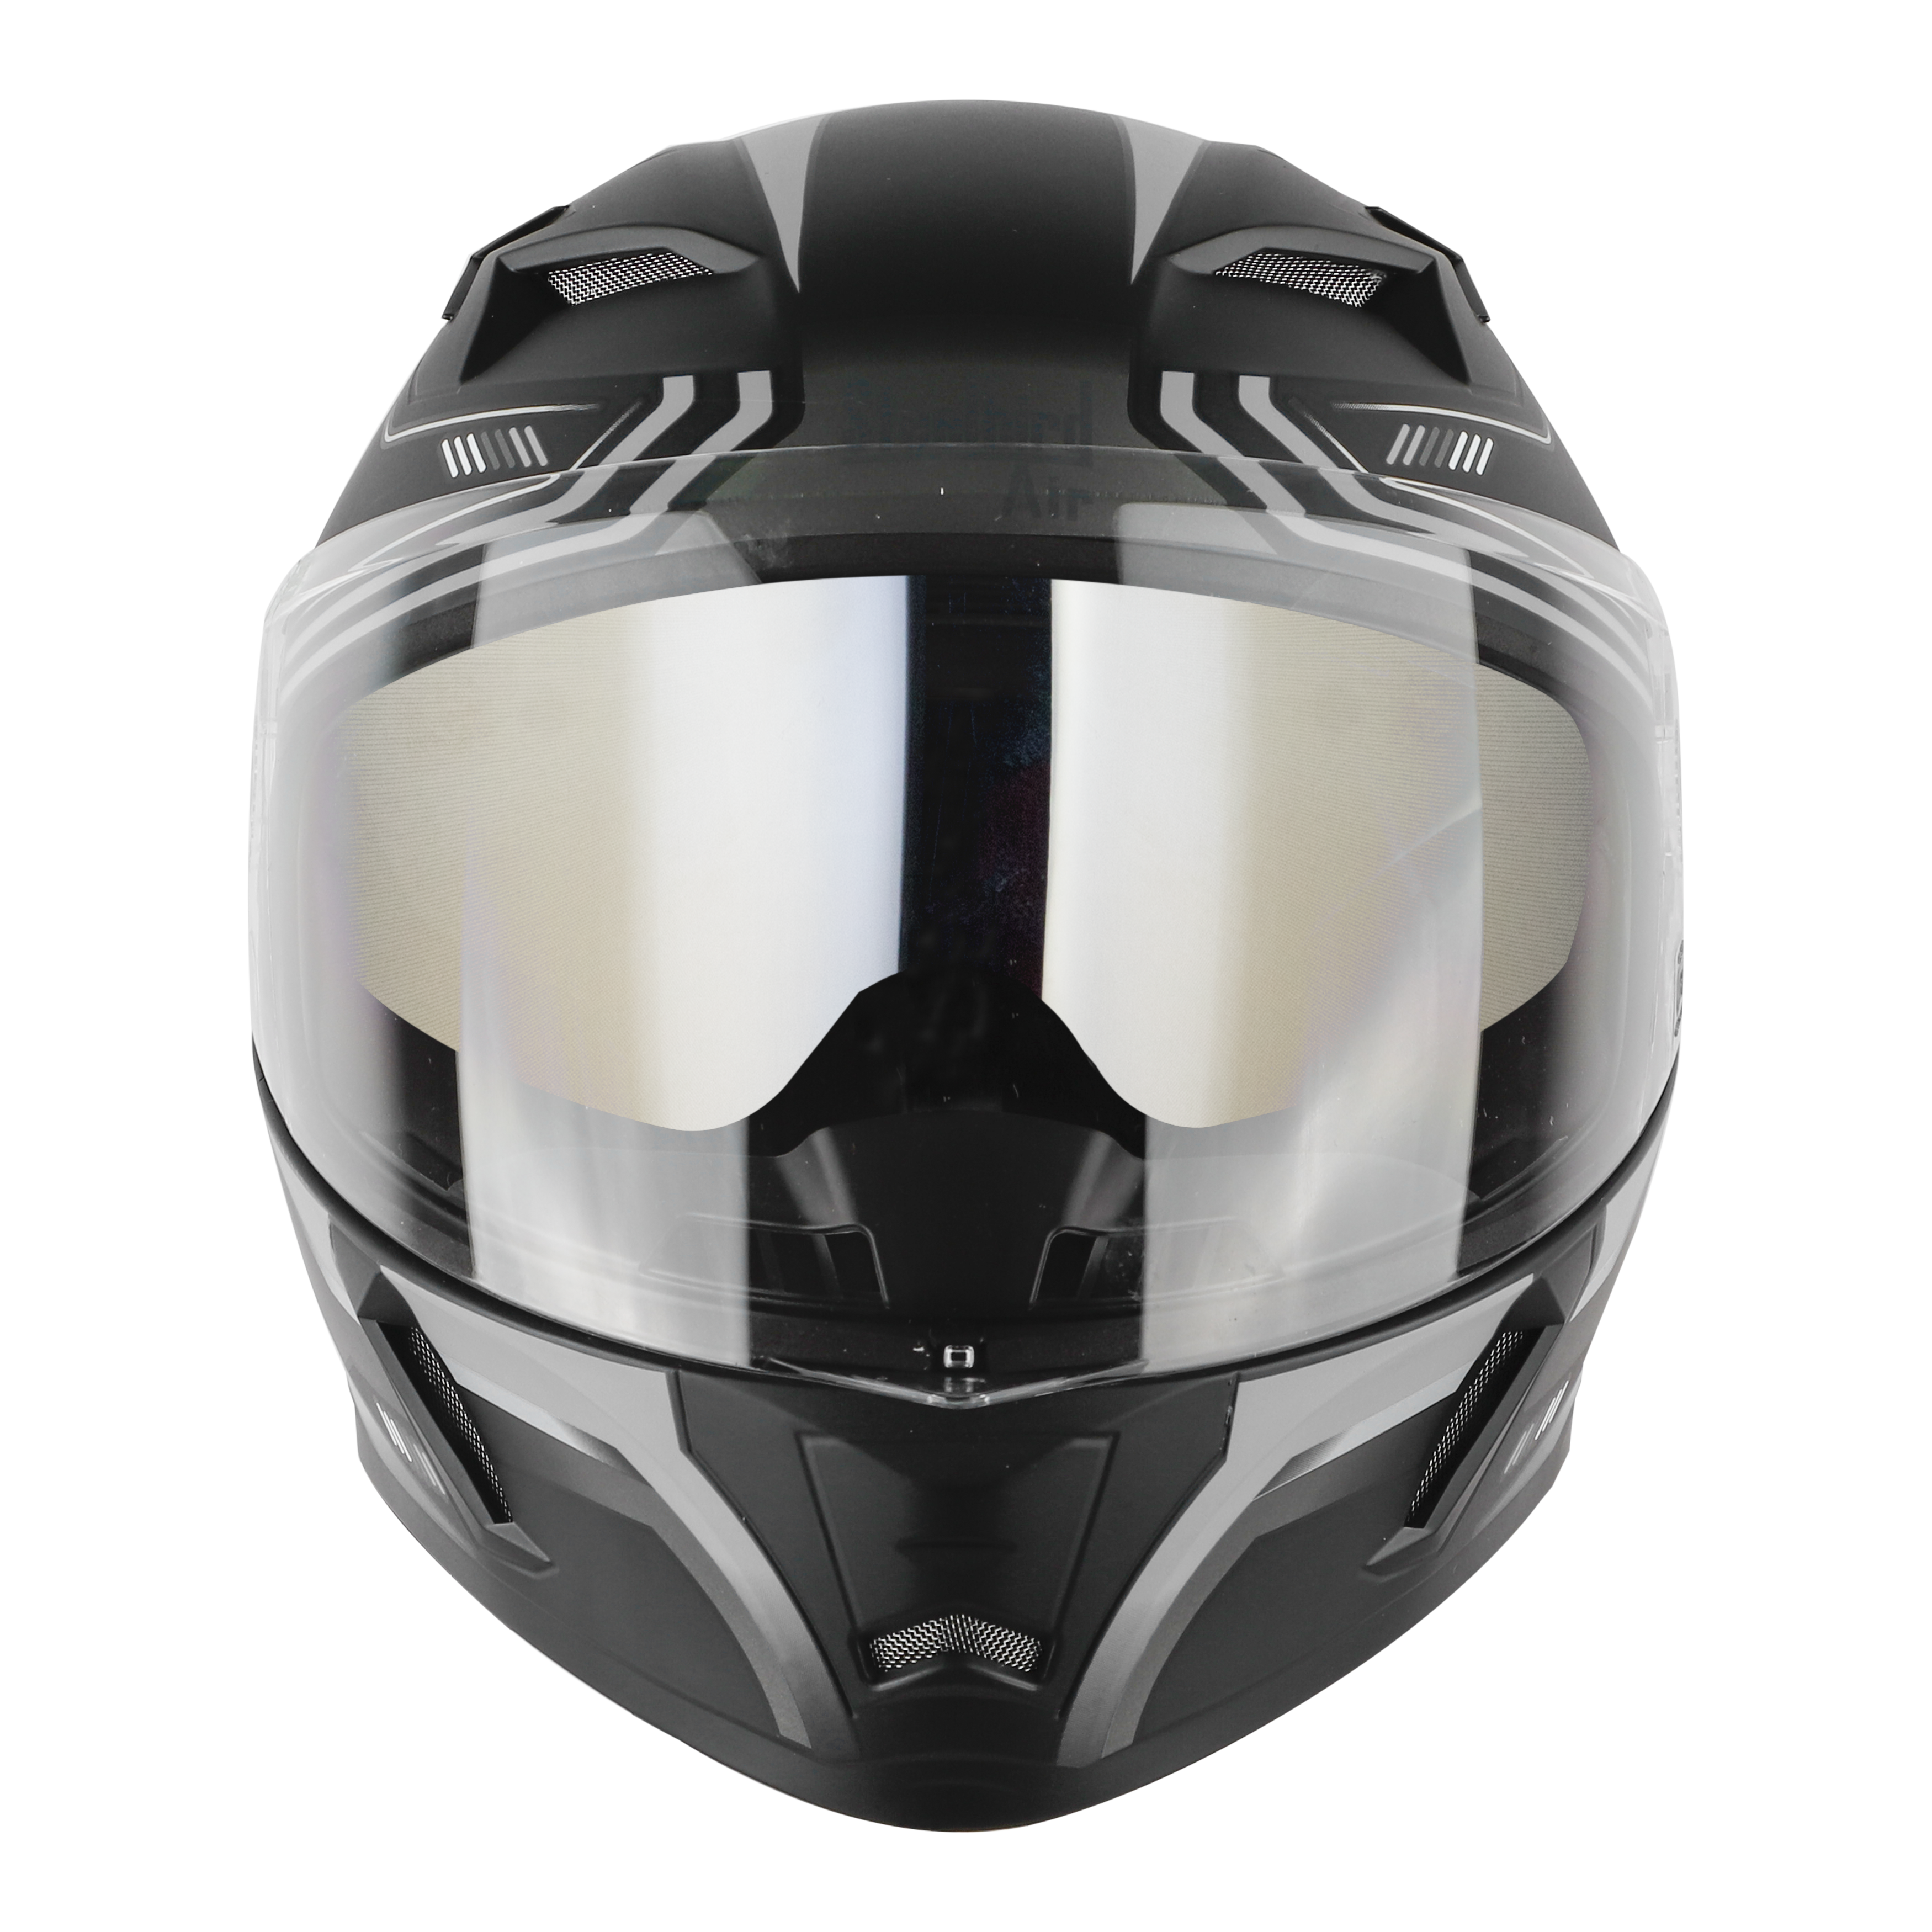 SBA-21 ULTIMATE RACE GLOSSY BLACK WITH GREY (WITH CHROME SILVER INNER SUN SHIELD)